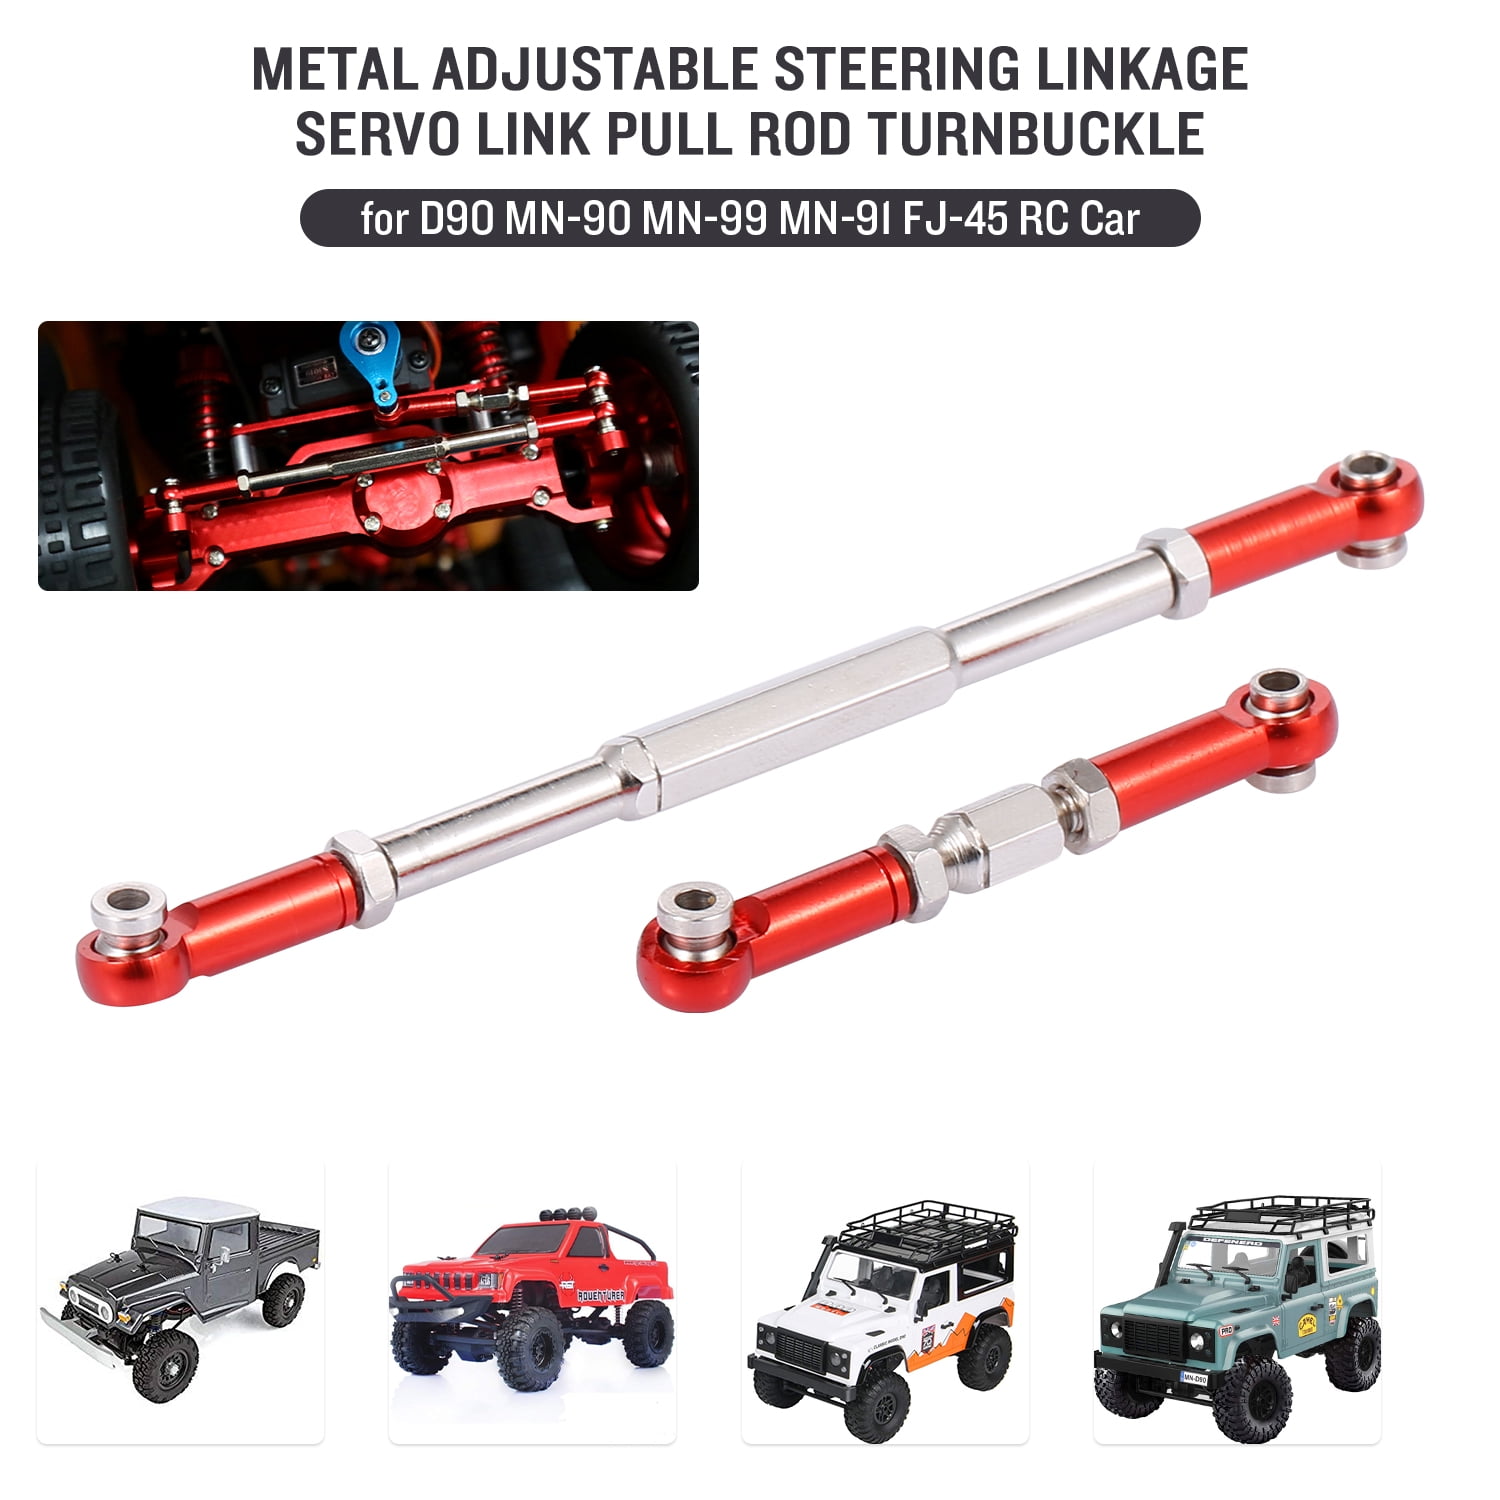 RC Car Servo Steering Linkage for 1:10 RC Cars Axial SCX10 90046 TRX4 D90 Parts 